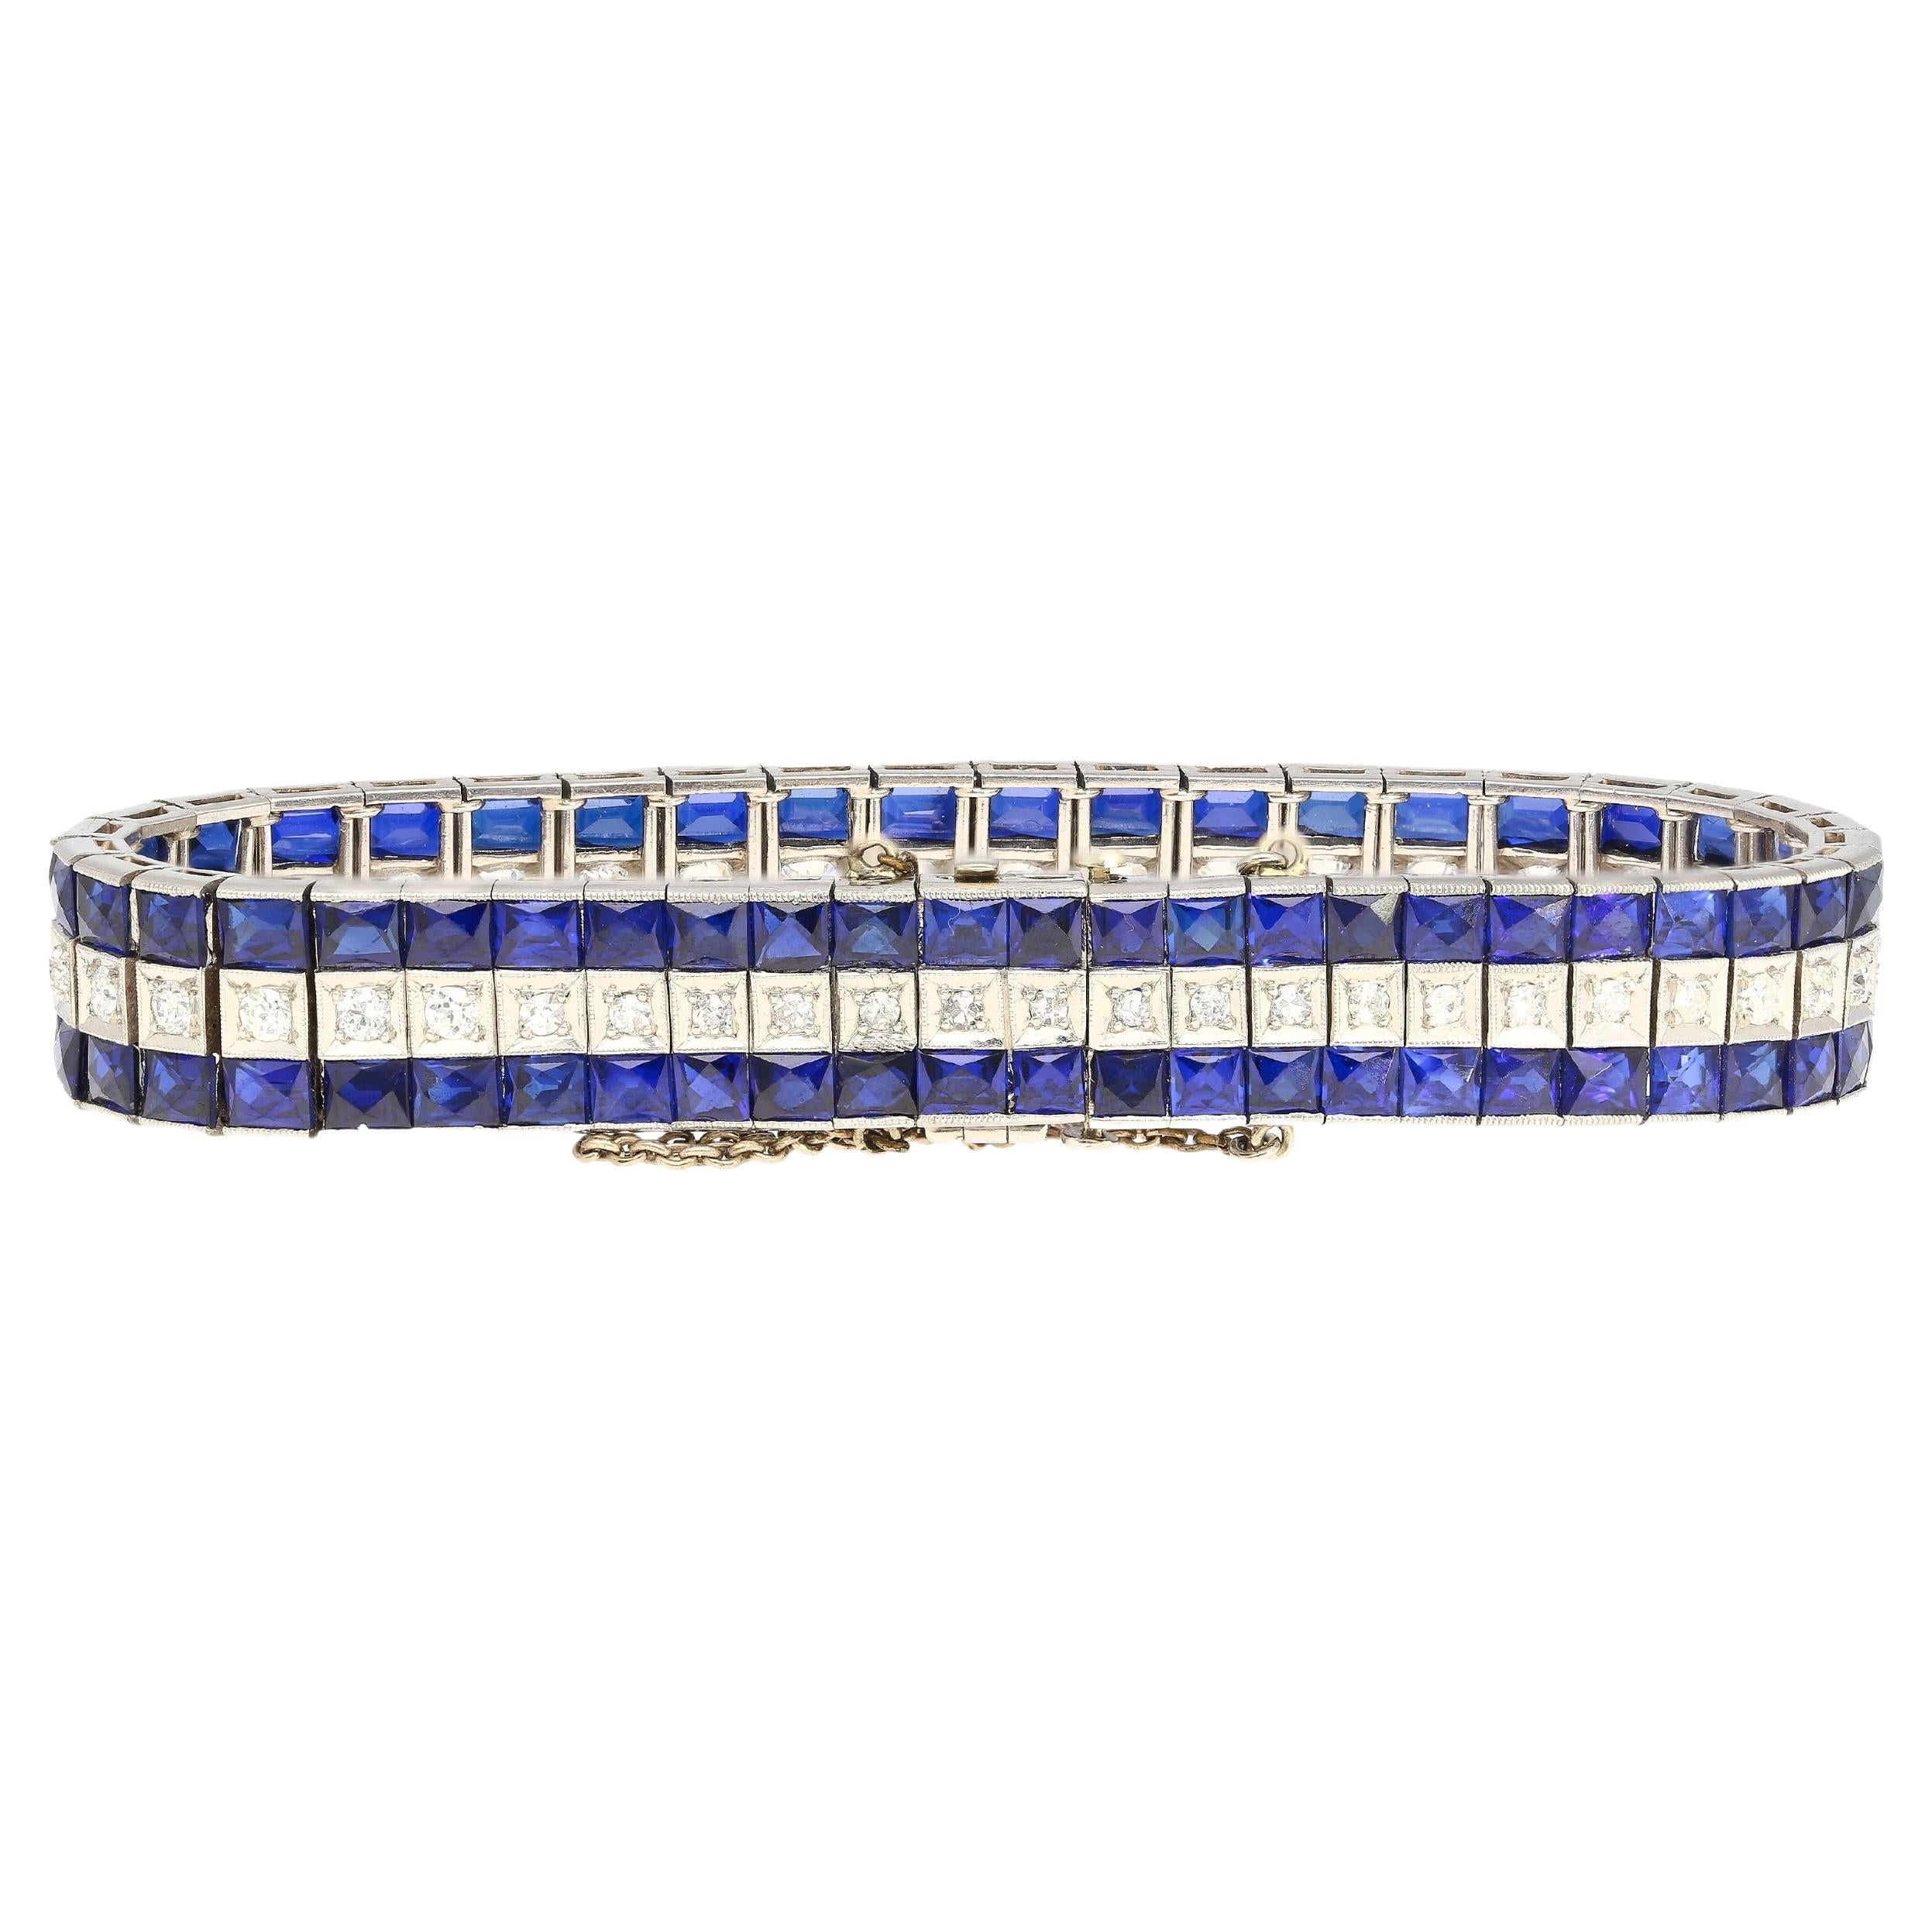 5.50 Carat Vintage Art Deco Platinum Bracelet With Diamonds and Synthetic Blue Sapphires. Synthetic sapphires and rubies were common in the late Art Deco and retro era. As seen in this masterfully handmade piece of history. A heavy 43.96-gram build